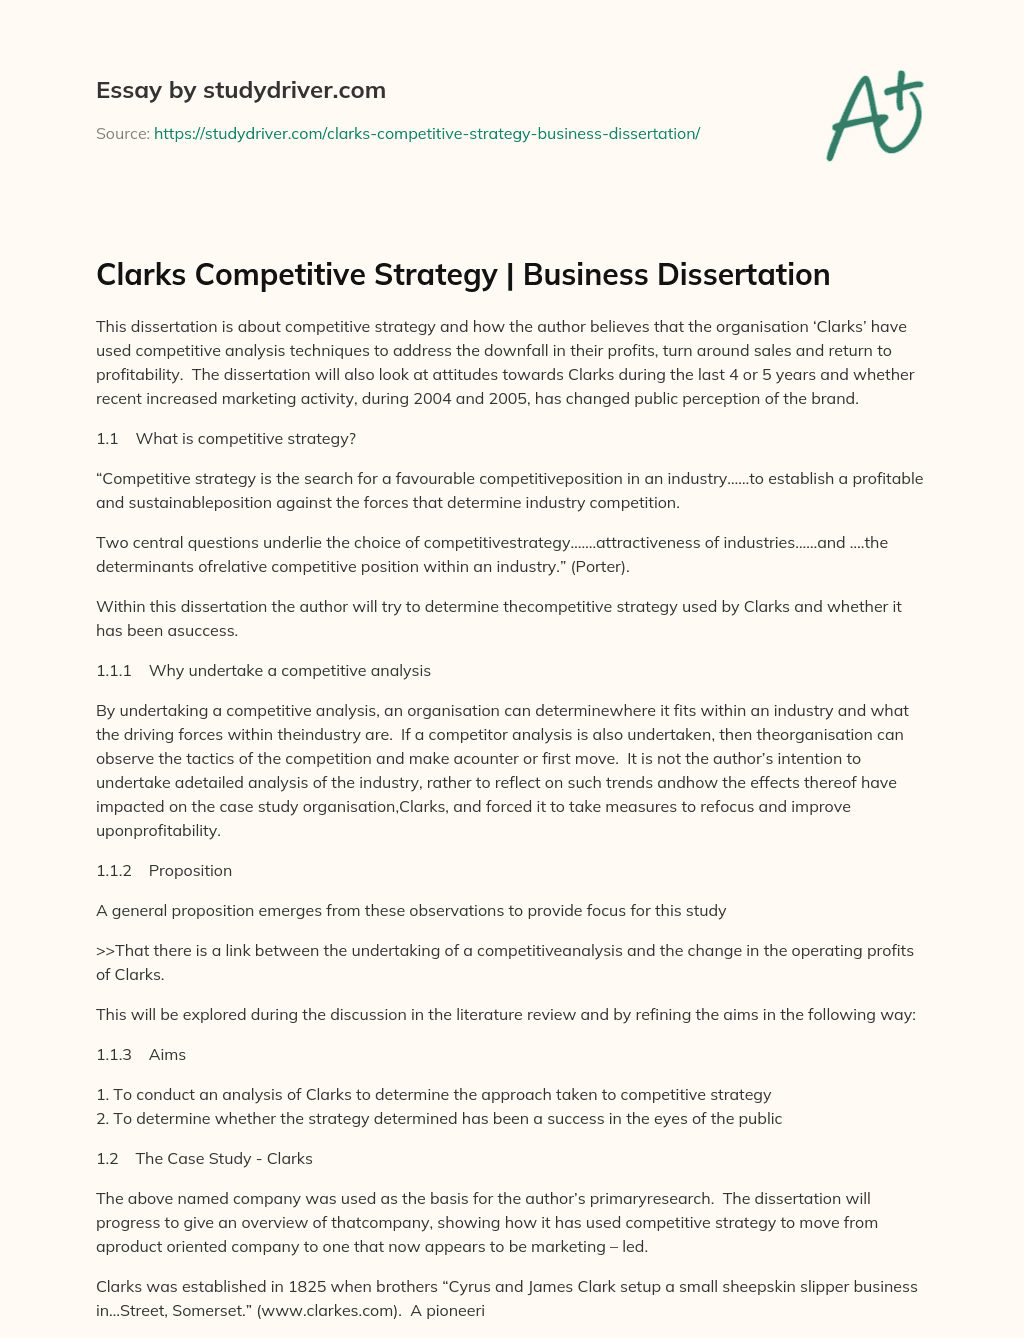 Clarks Competitive Strategy | Business Dissertation essay